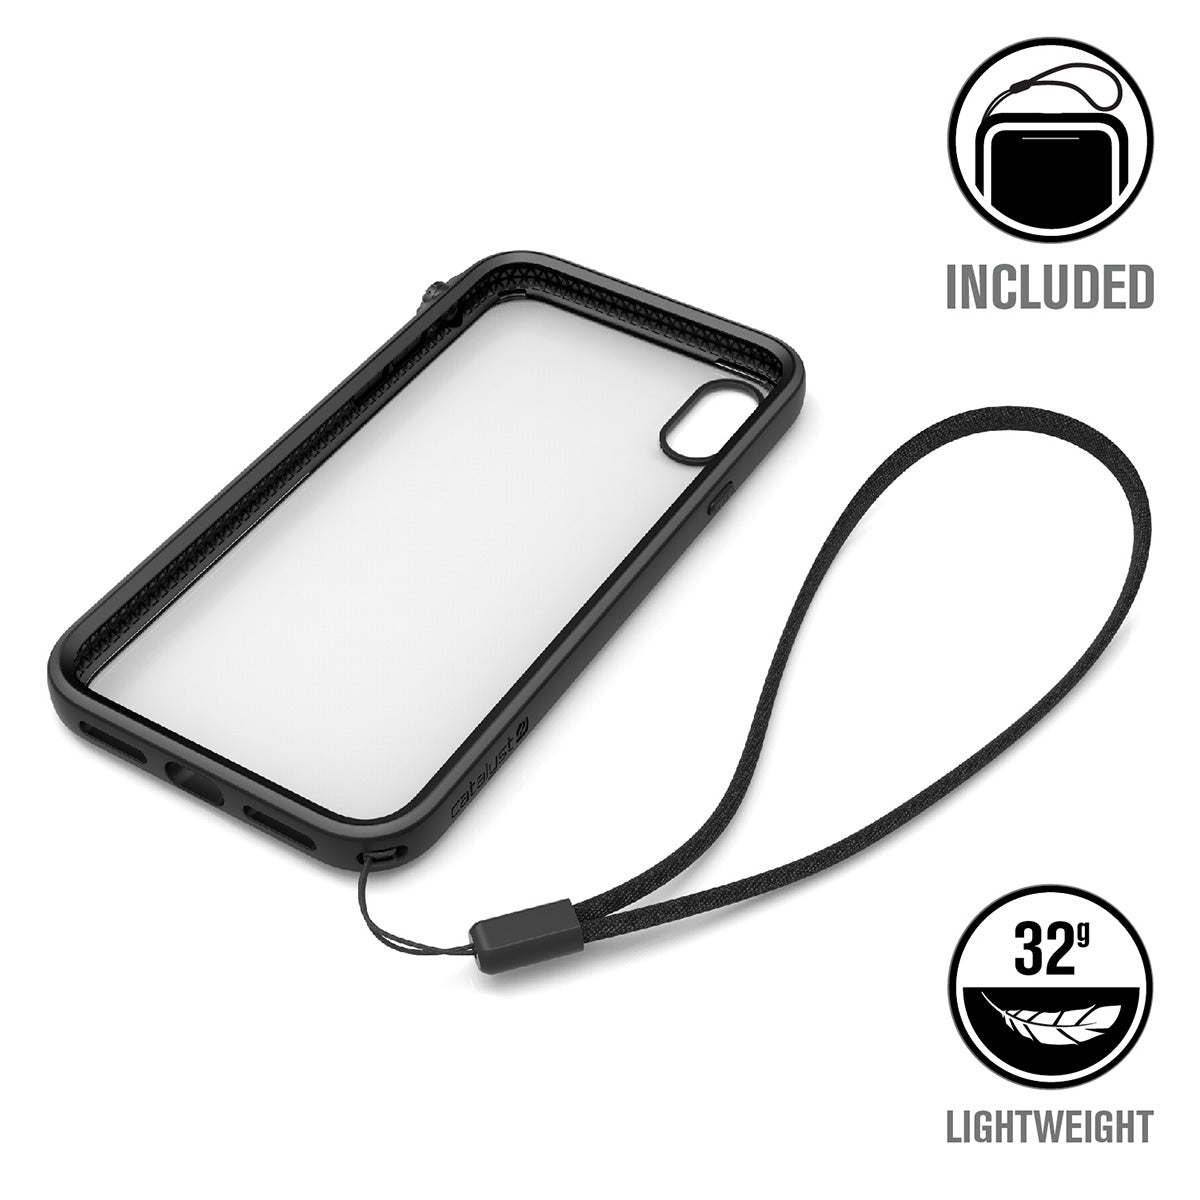 Catalyst Impact Protection Case for iPhone X/XR/Xs/Xs Max showing the catalyst case with lanyard attached text reads included 32g lightweight